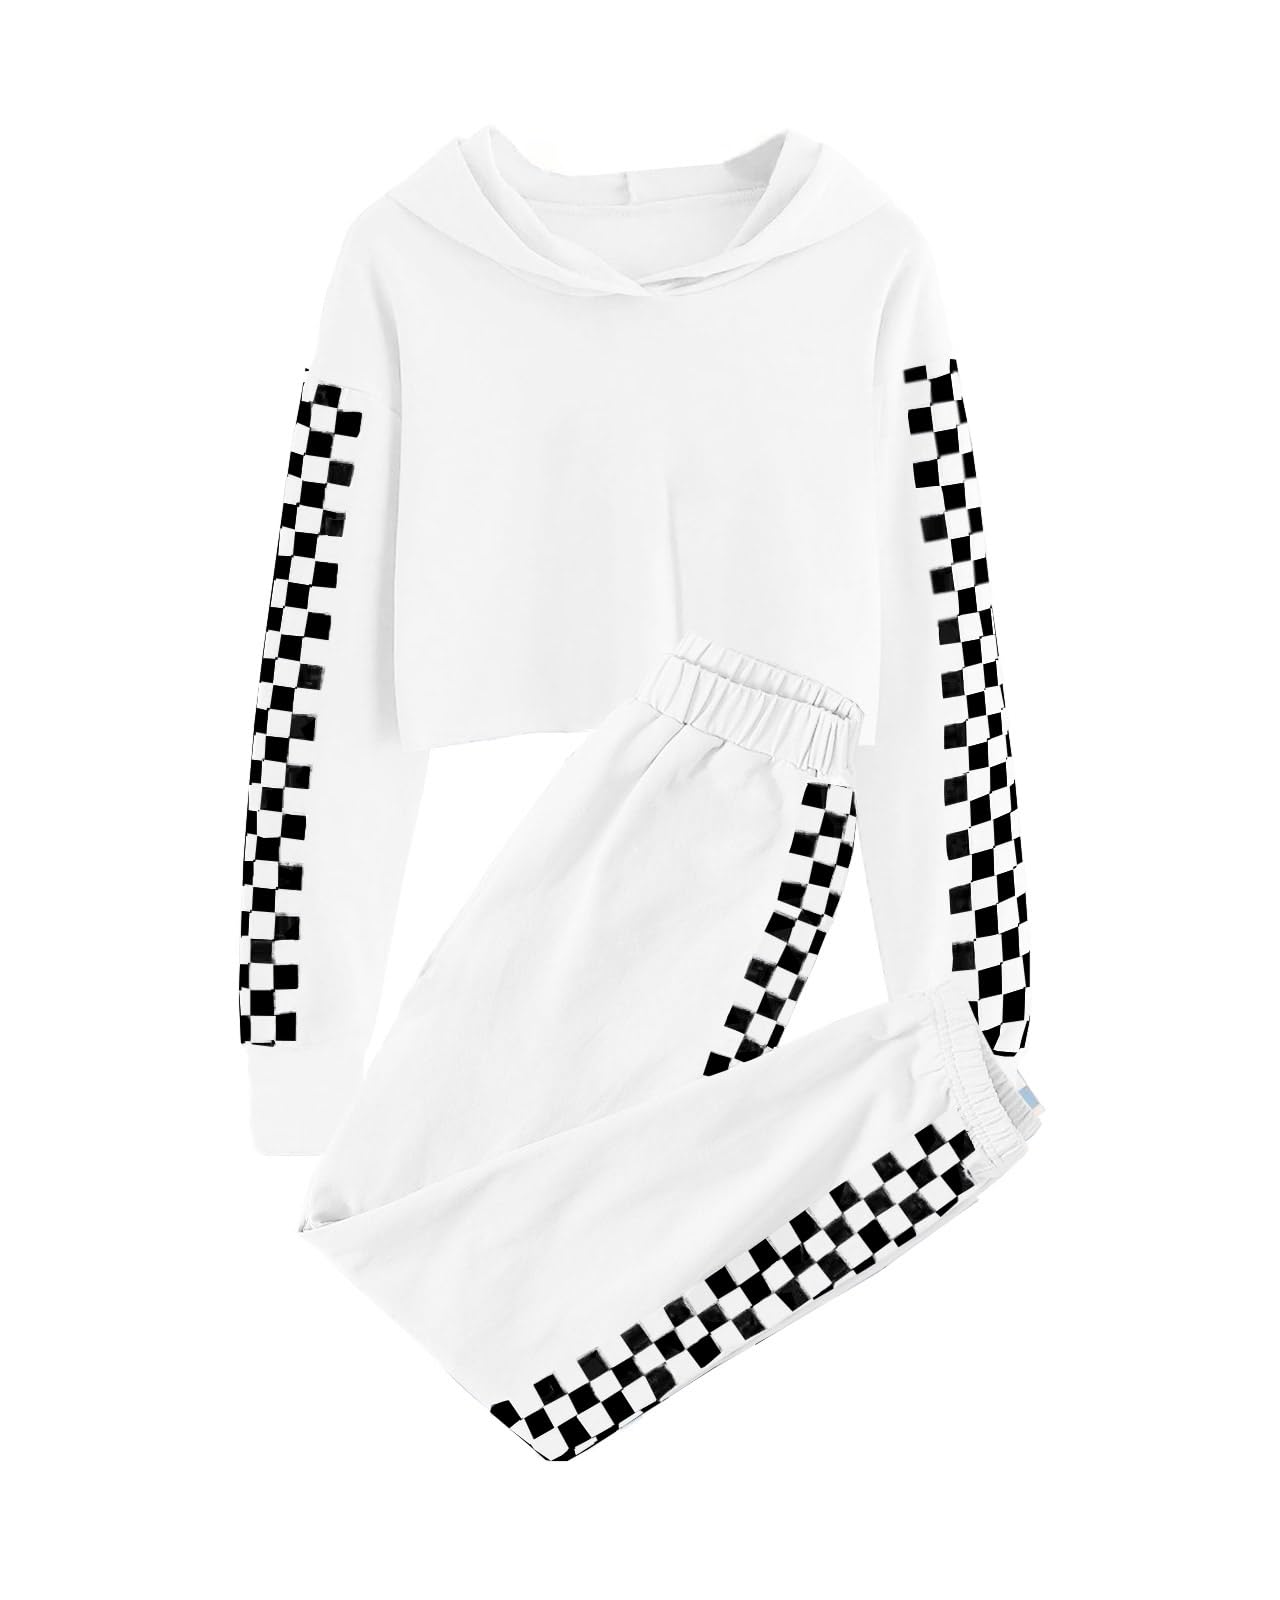 Meikulo Crop Tops Hoodies for Teen Girls Clothes Kids Cute Long Sleeve Shirts Checkered Sweatshirts and Sweatpants 2 Piece Outfits Sweatsuit Clothing Sets White, 11-12 Years